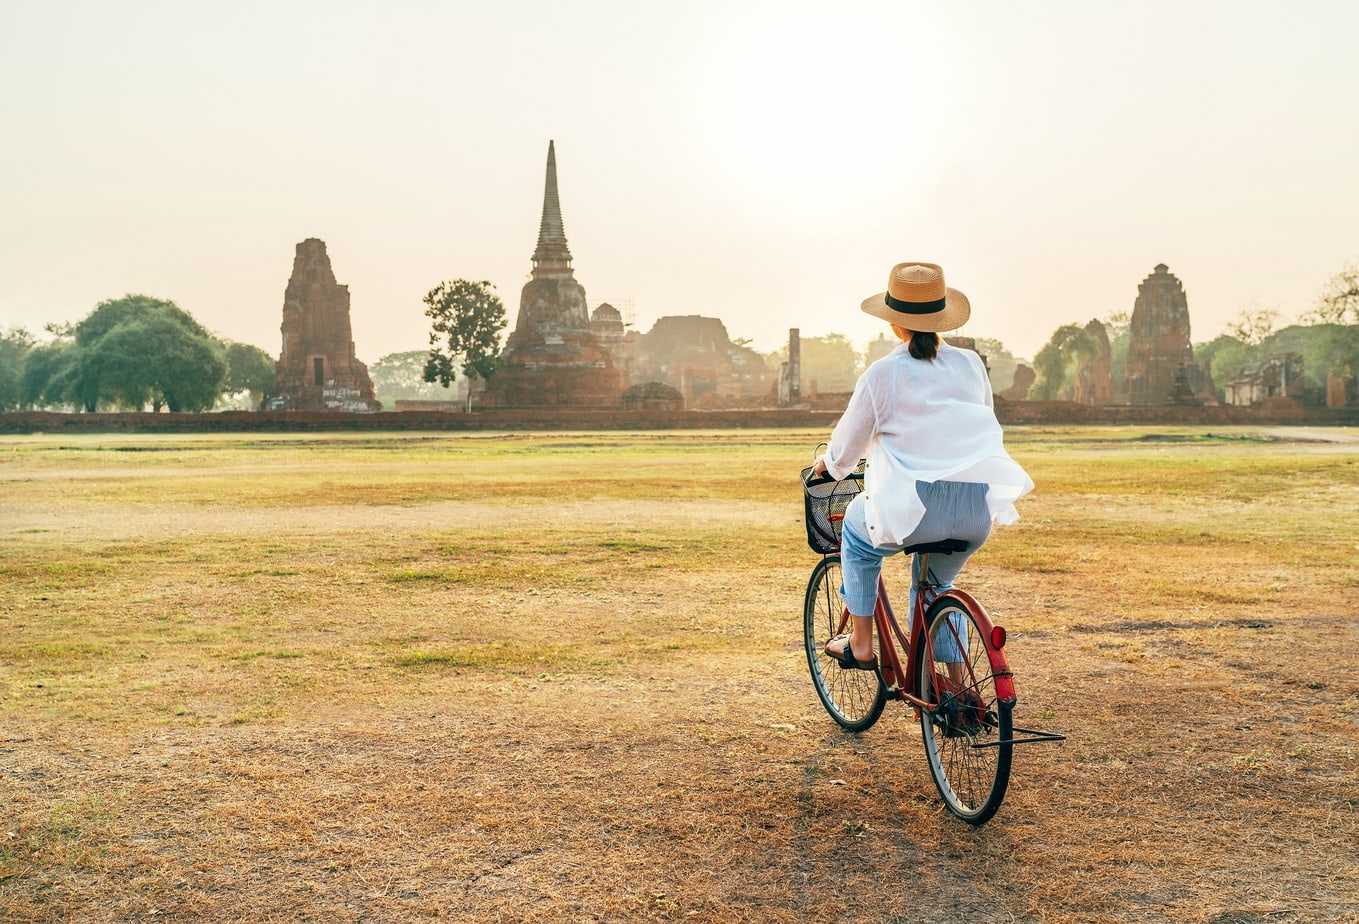 Woman riding bicykle near Ayutthaya historical park in Thailand, early morning time